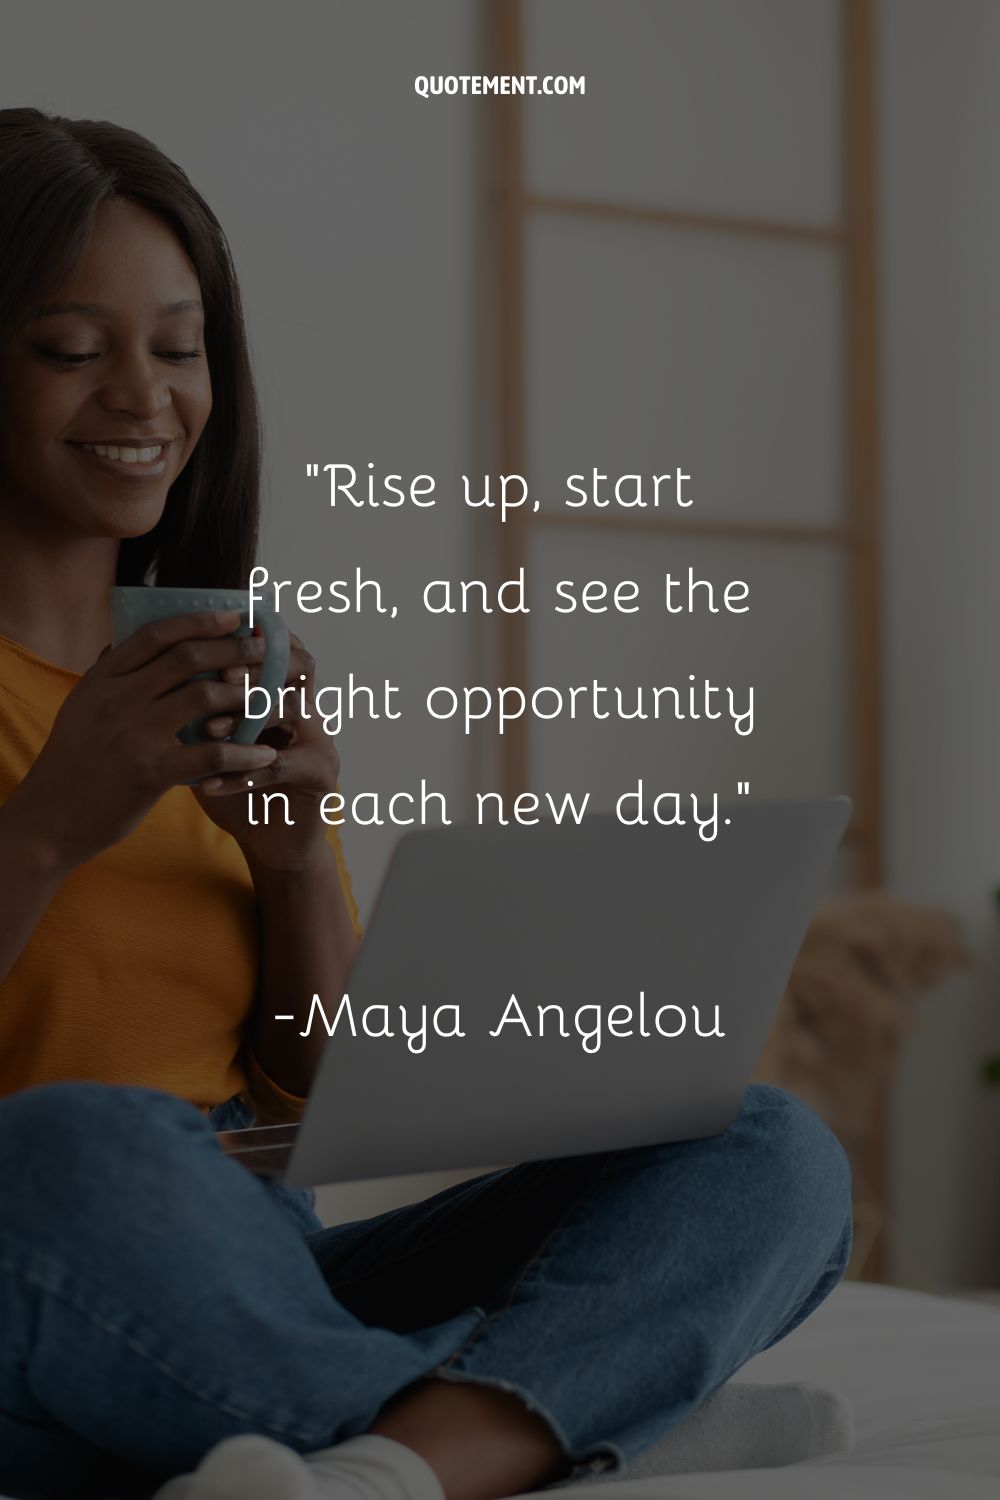 Rise up, start fresh, and see the bright opportunity in each new day.